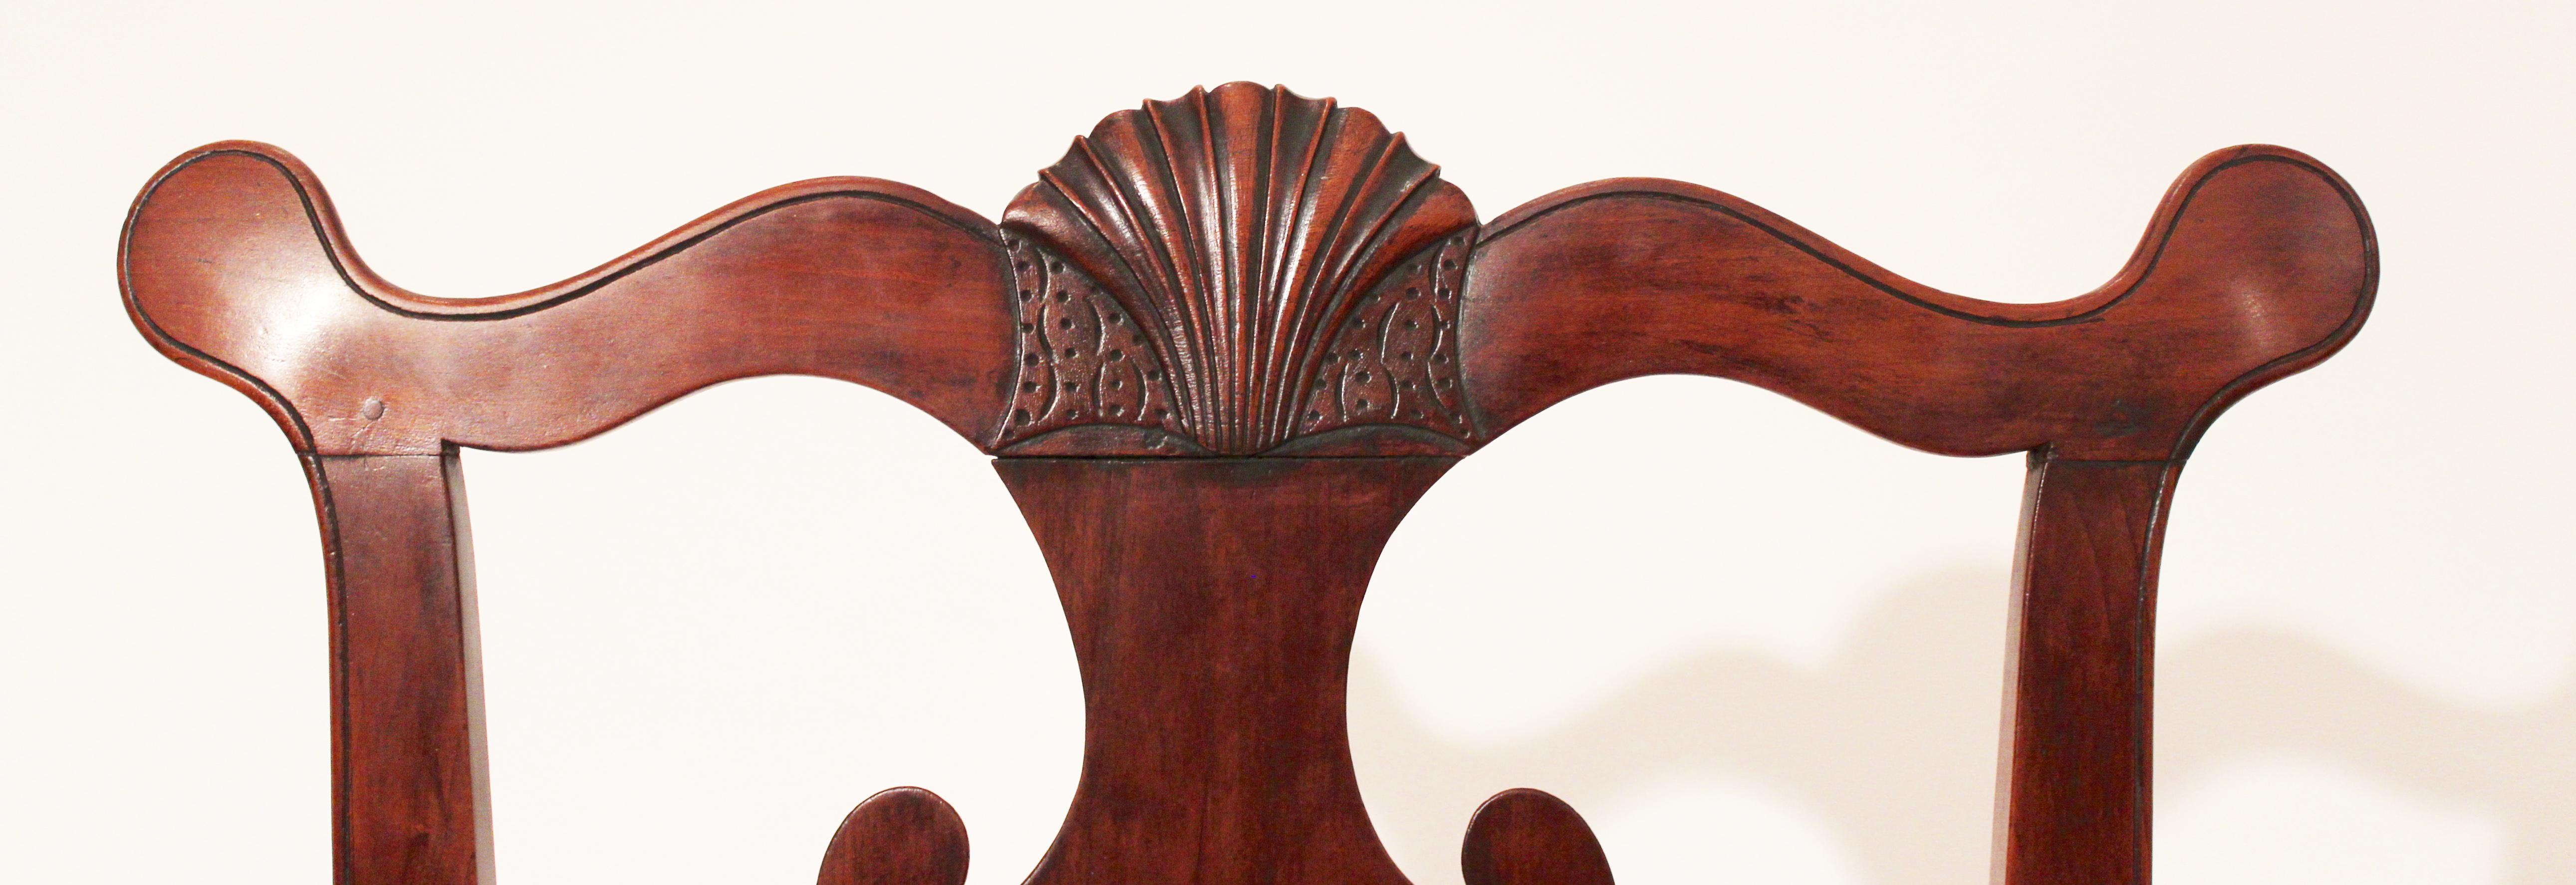 Rare pair of walnut Queen Anne side chairs with carved shell on cupids bow crest rail solid splat a shell carved on front rail and tulip style carving on the knees cabriole legs terminating in trifid feet. Made in Bucks or Montgomery County PA.